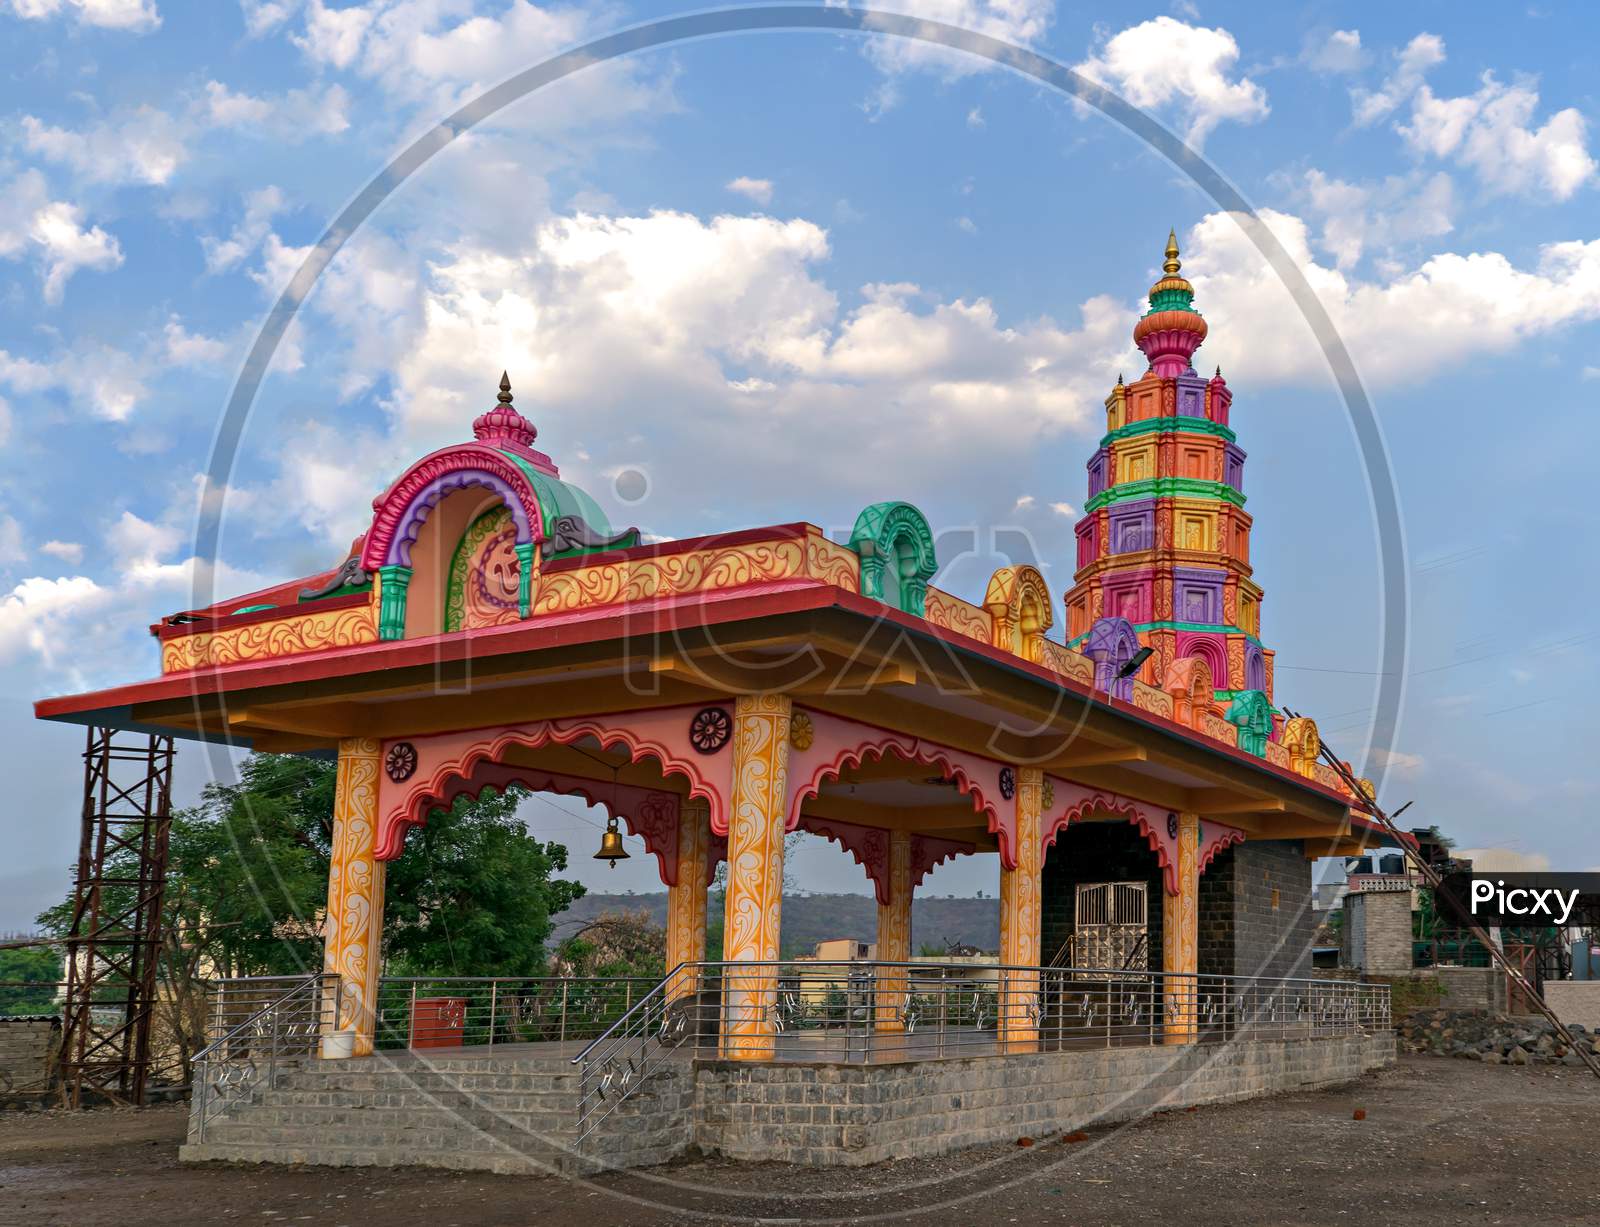 Colorful Temple With Nice Cloudscape In Bavdhan Village Of Pune, India.